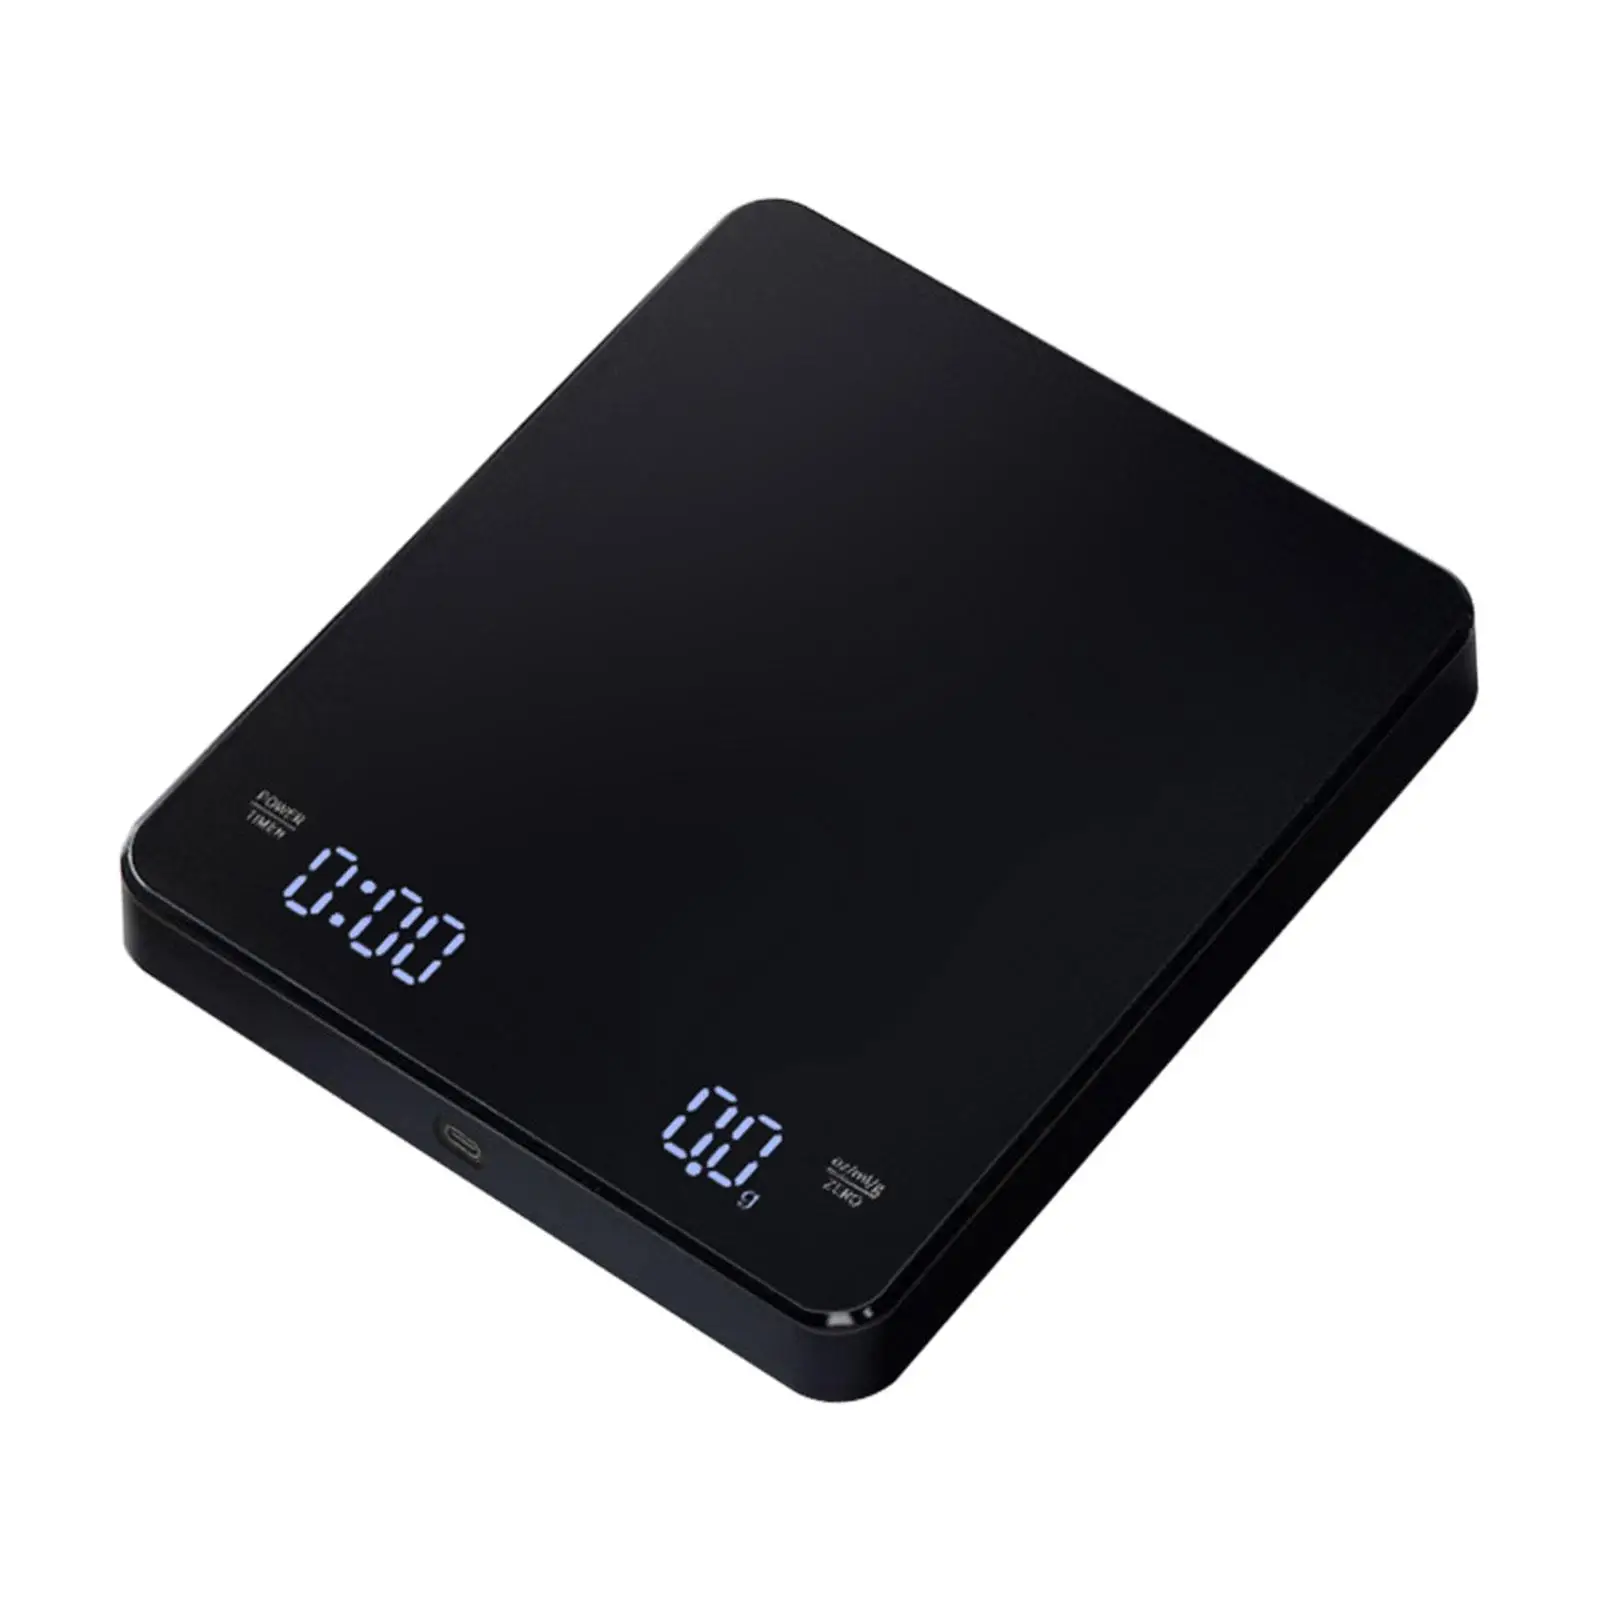 Digital Scale with Timer Accessory High Precision Professional Portable Small Food Scale for Kitchen Home Coffee Barista Baking